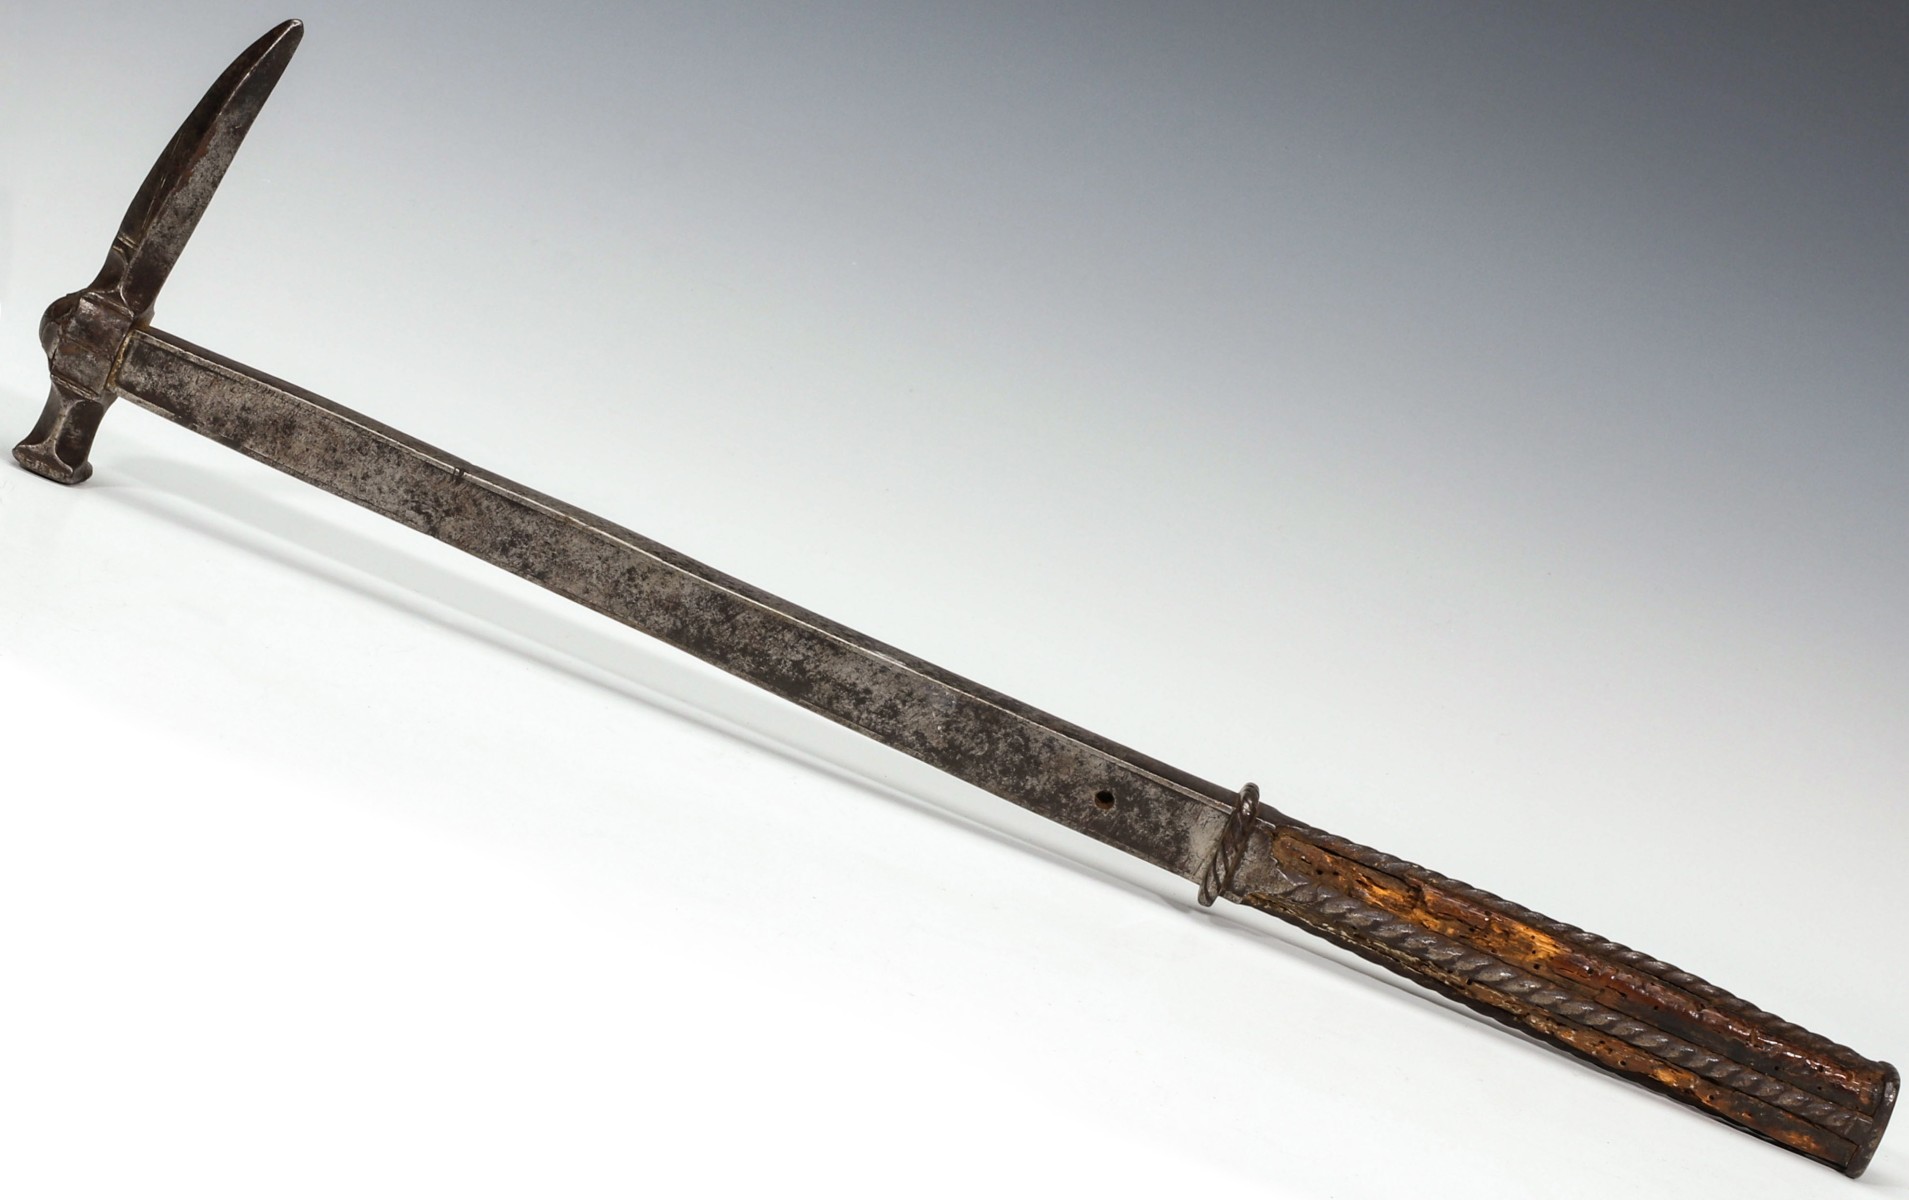 A LATE 16TH TO EARLY 17TH CENTURY STEEL WAR HAMMER